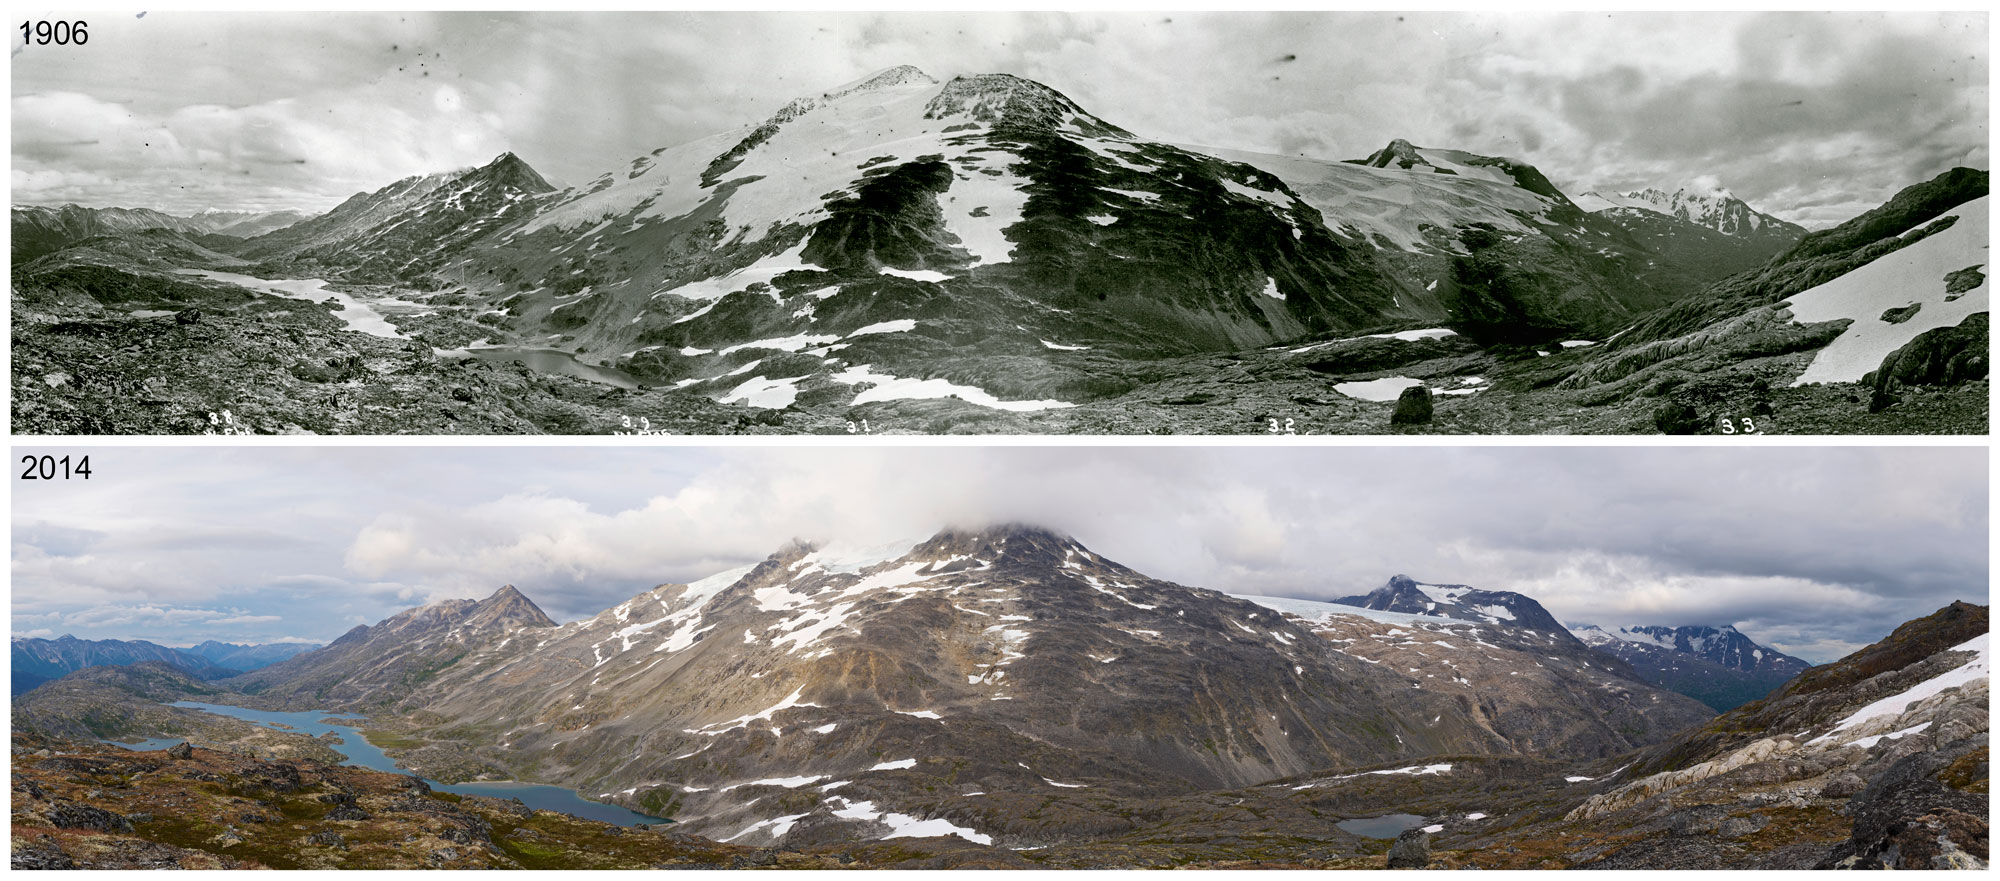 Photos of Chilkoot Pass, Alaska, at two points in time: 1906 and 2014. Comparison of the photos shows the retreat of glaciers on the mountains in the images between 1906 and 2014.